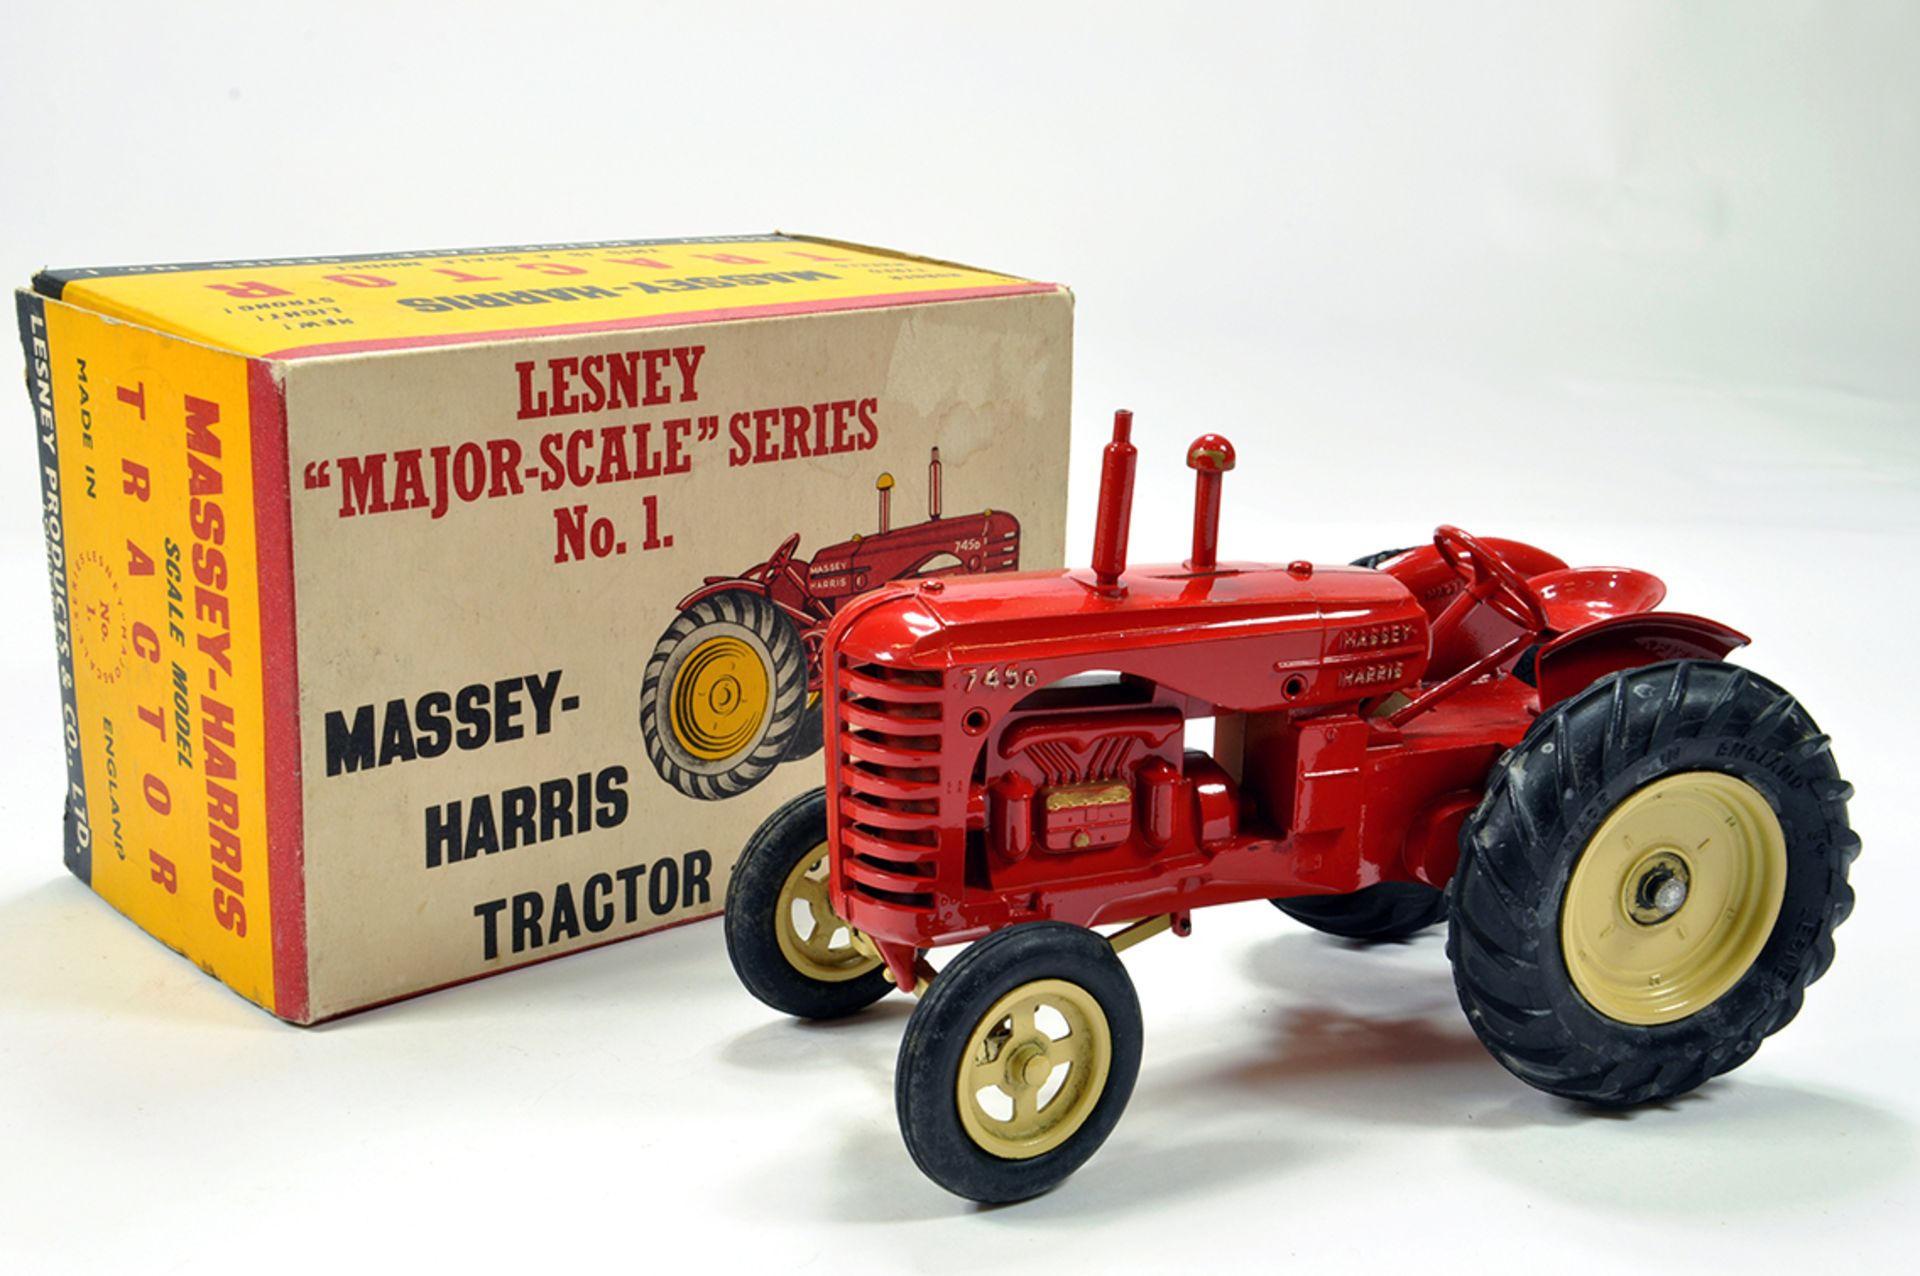 Lesney Major Scale No. 1 (Large Scale) Massey Harris 745D Tractor. Superb Example in Red with Gold